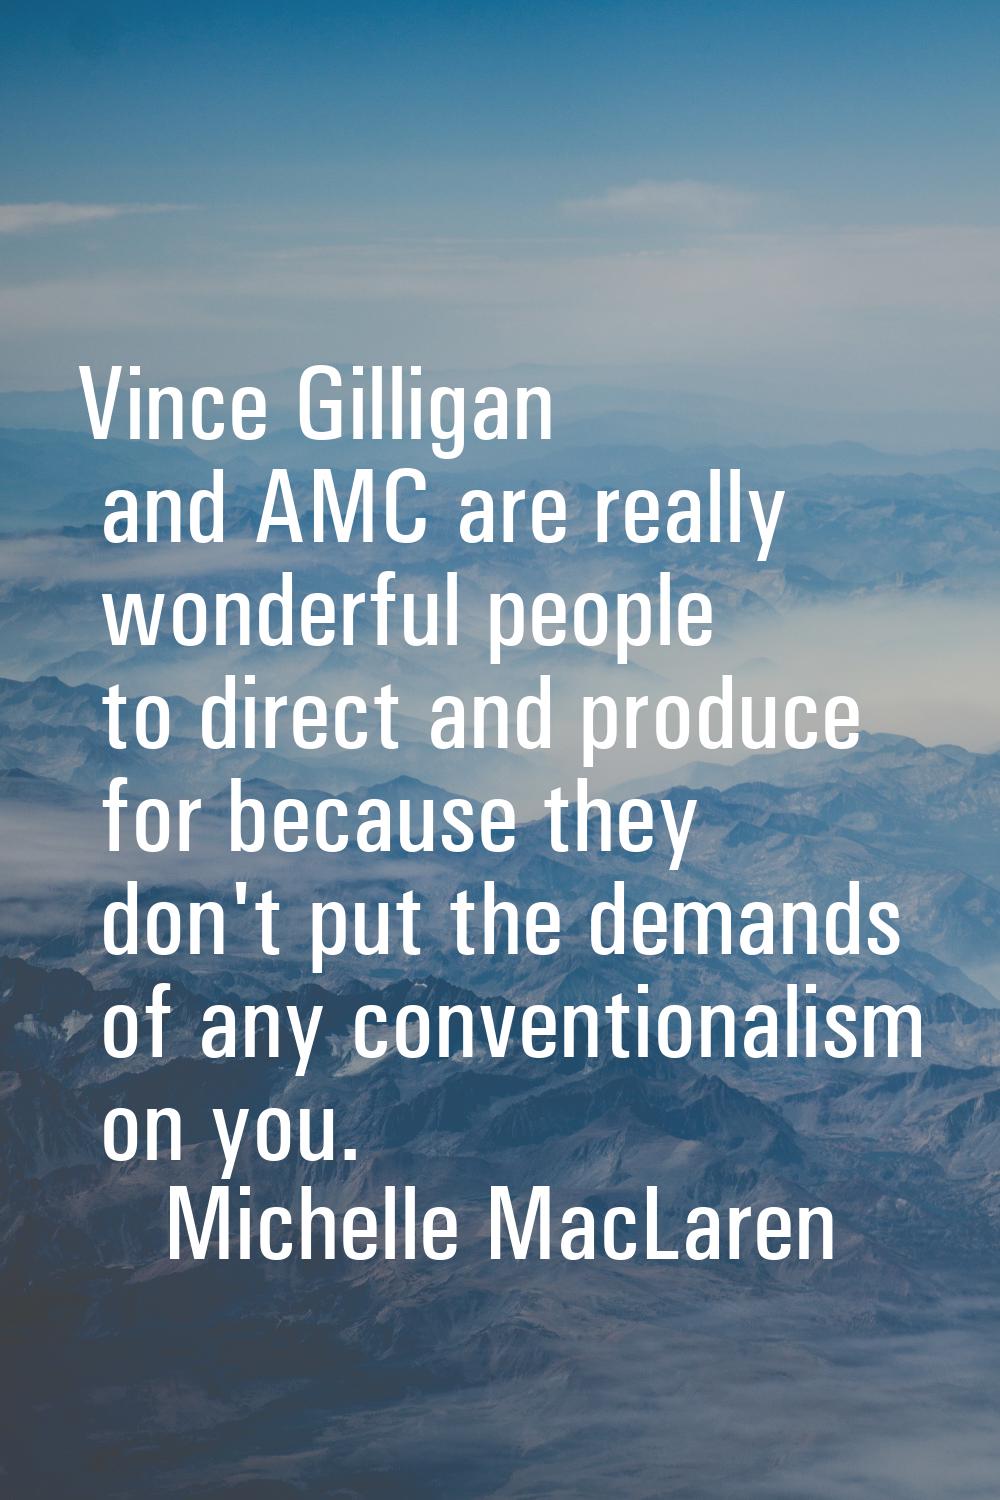 Vince Gilligan and AMC are really wonderful people to direct and produce for because they don't put